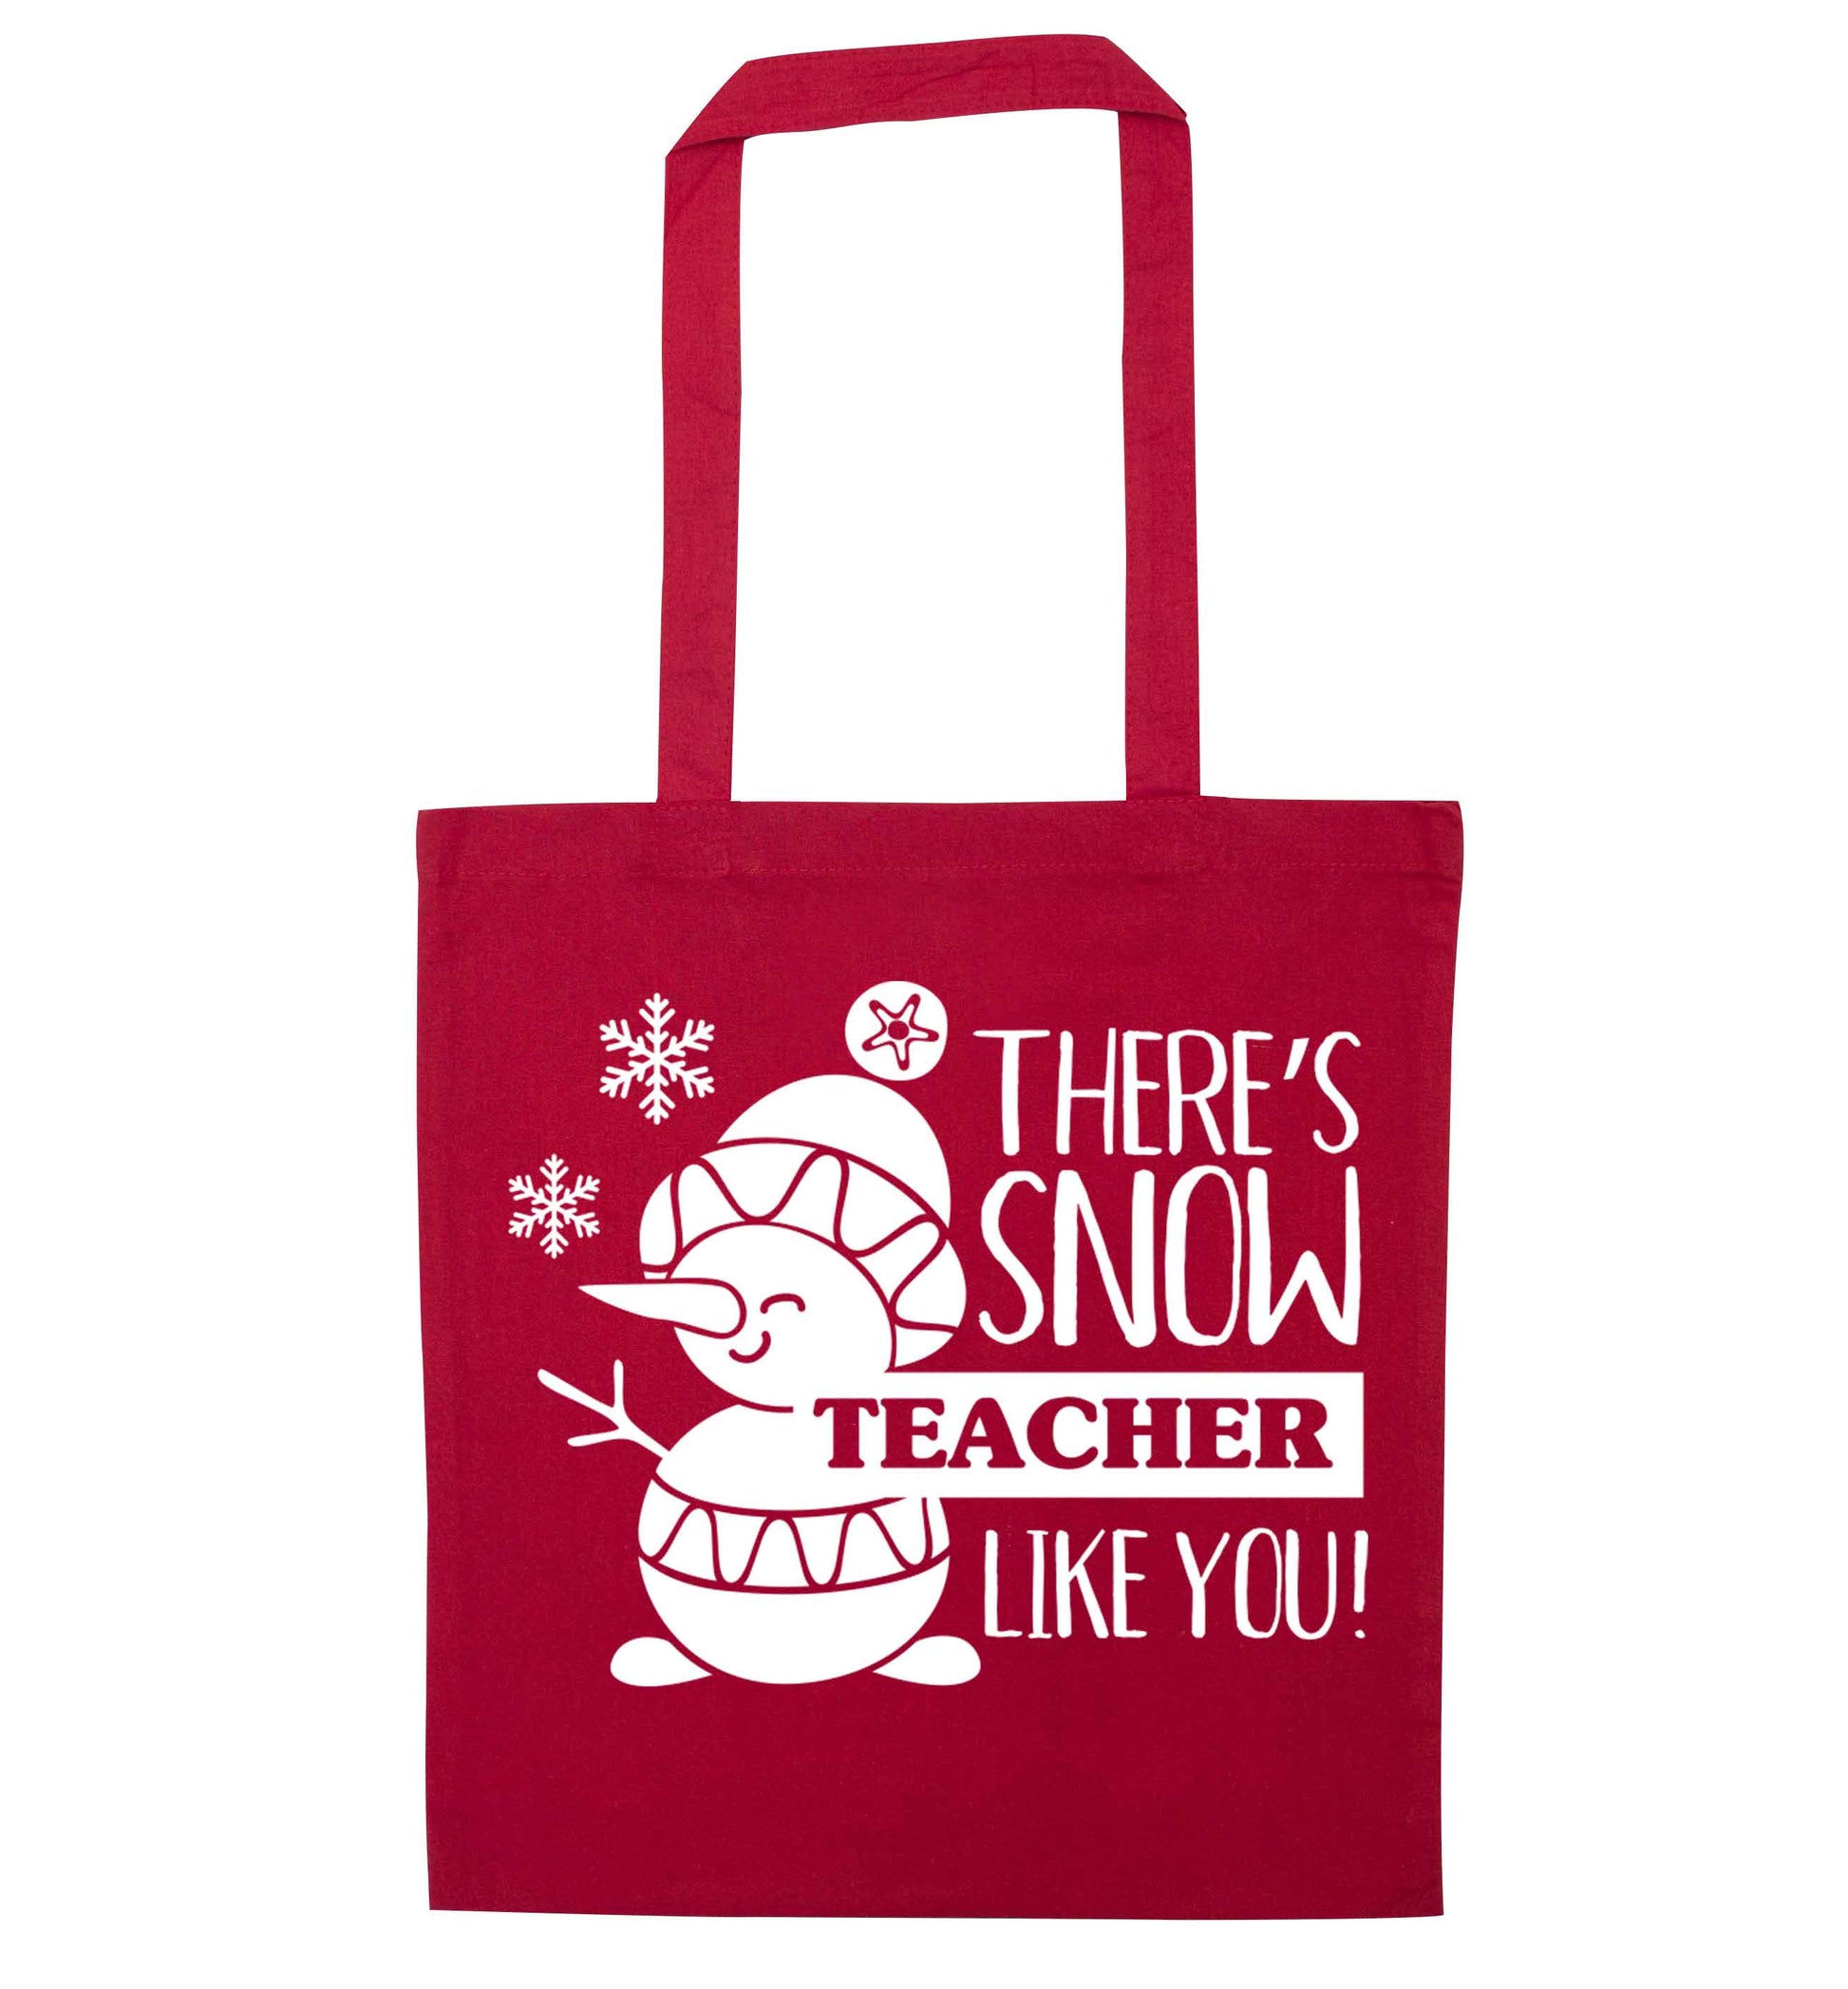 There's snow teacher like you red tote bag